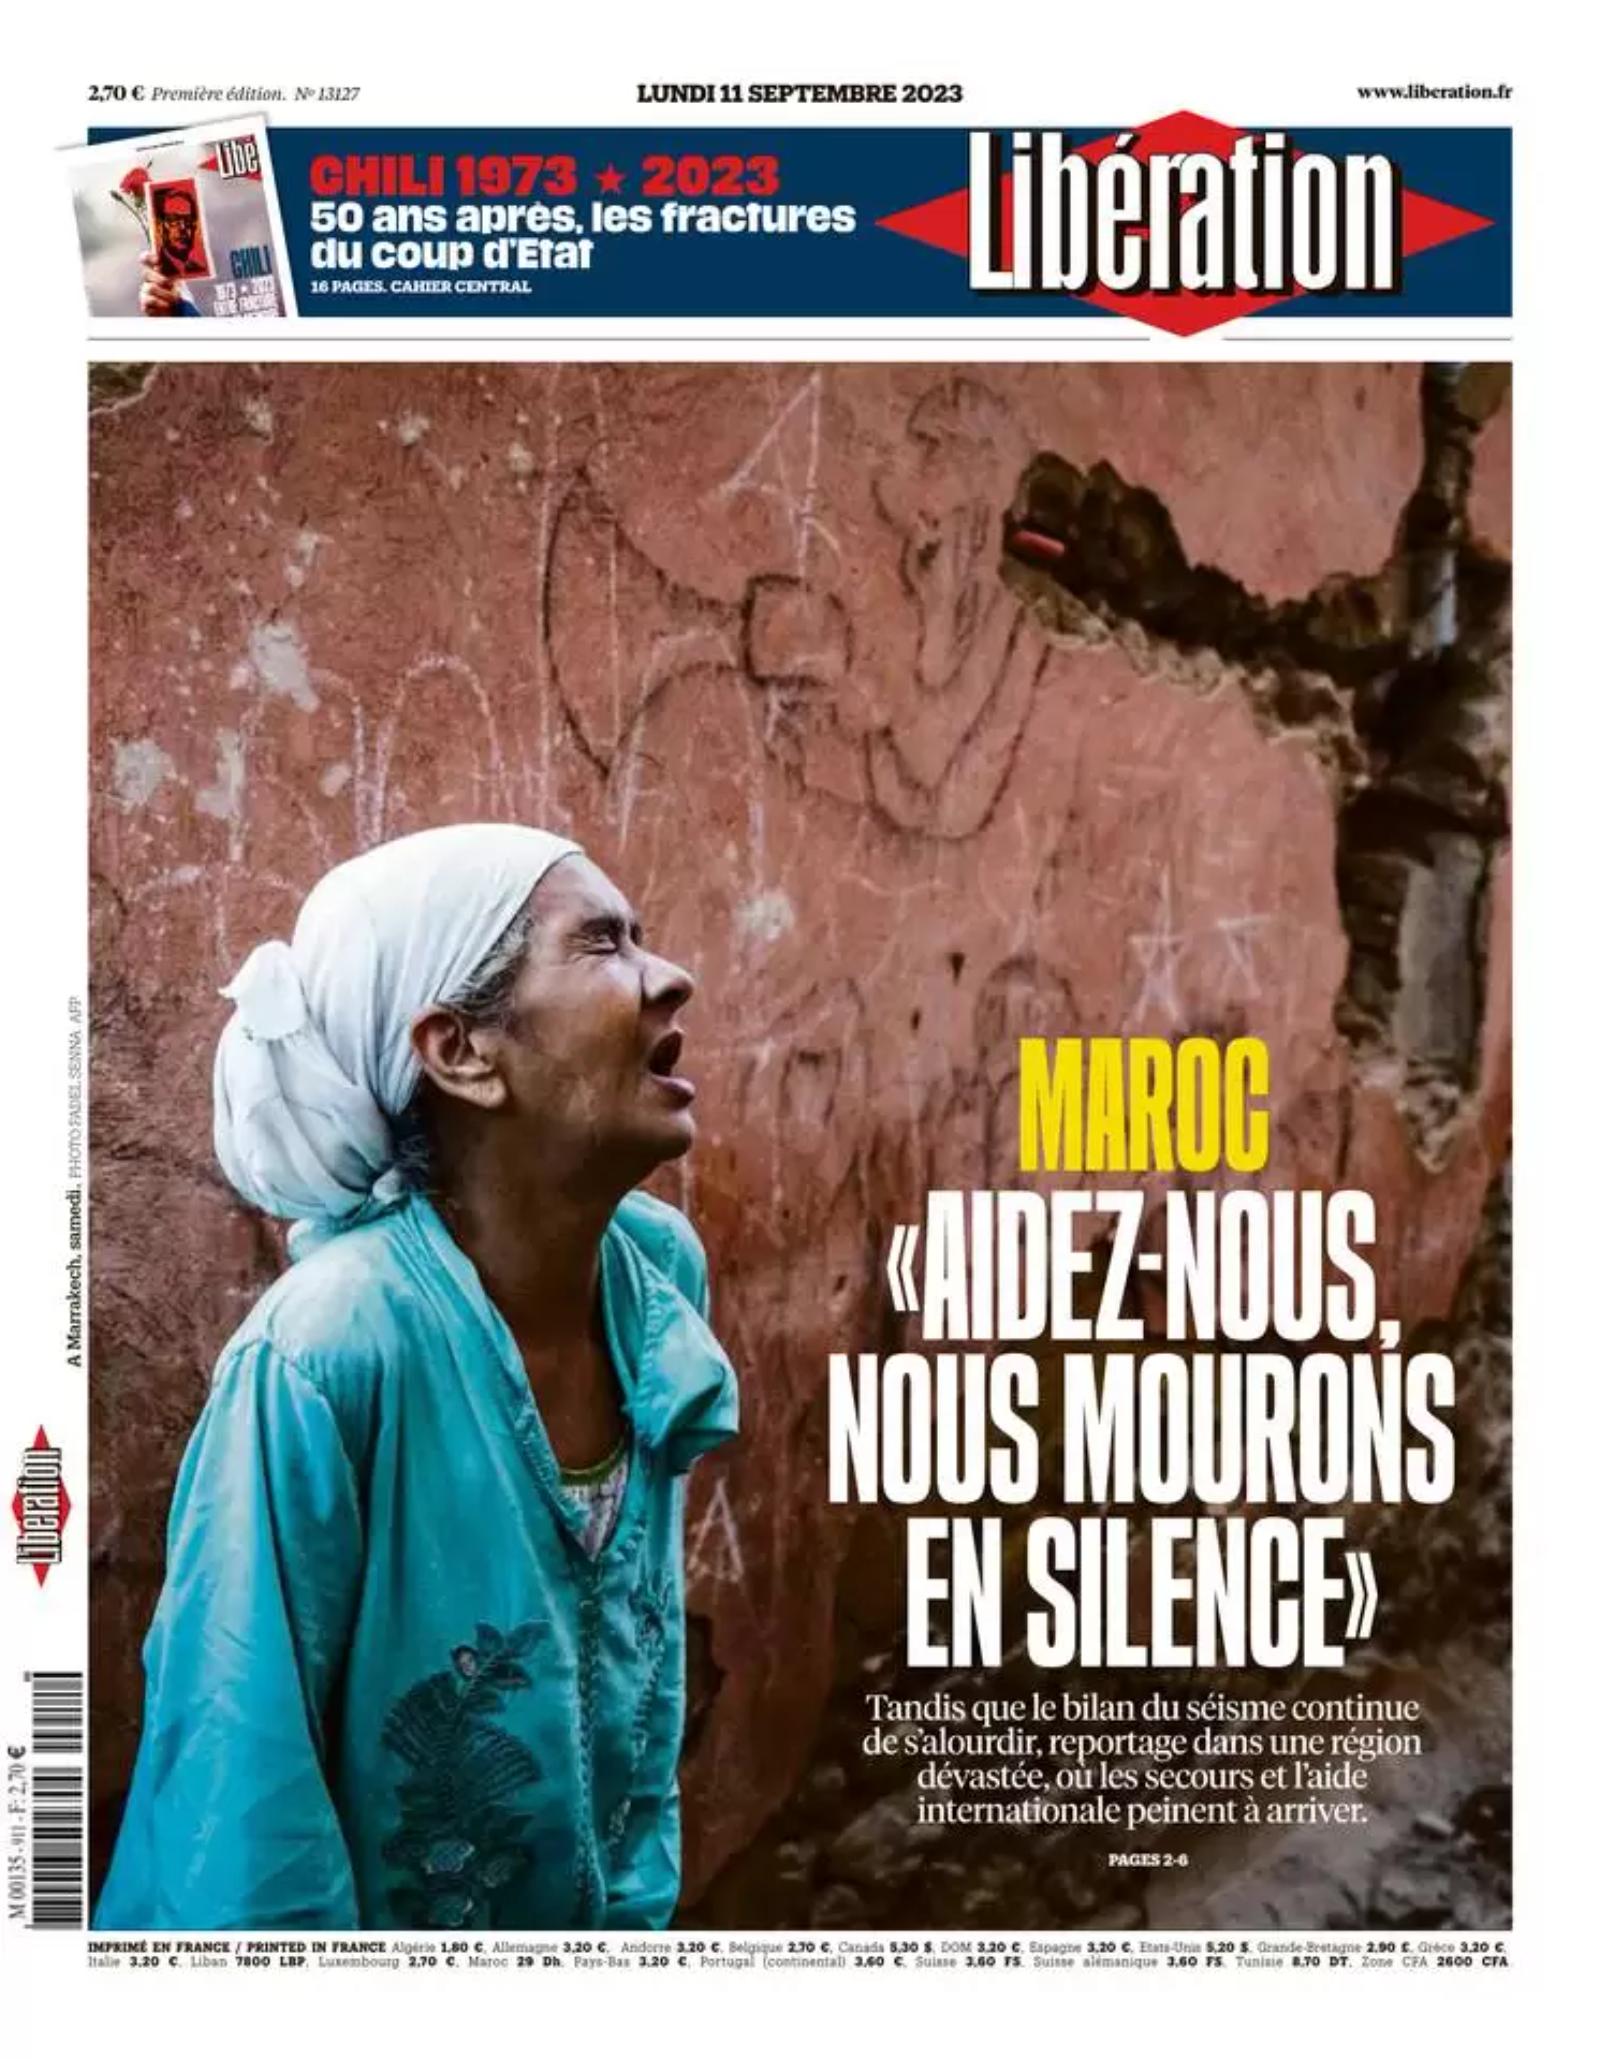 The front page of Libération, Sept. 11, 2023